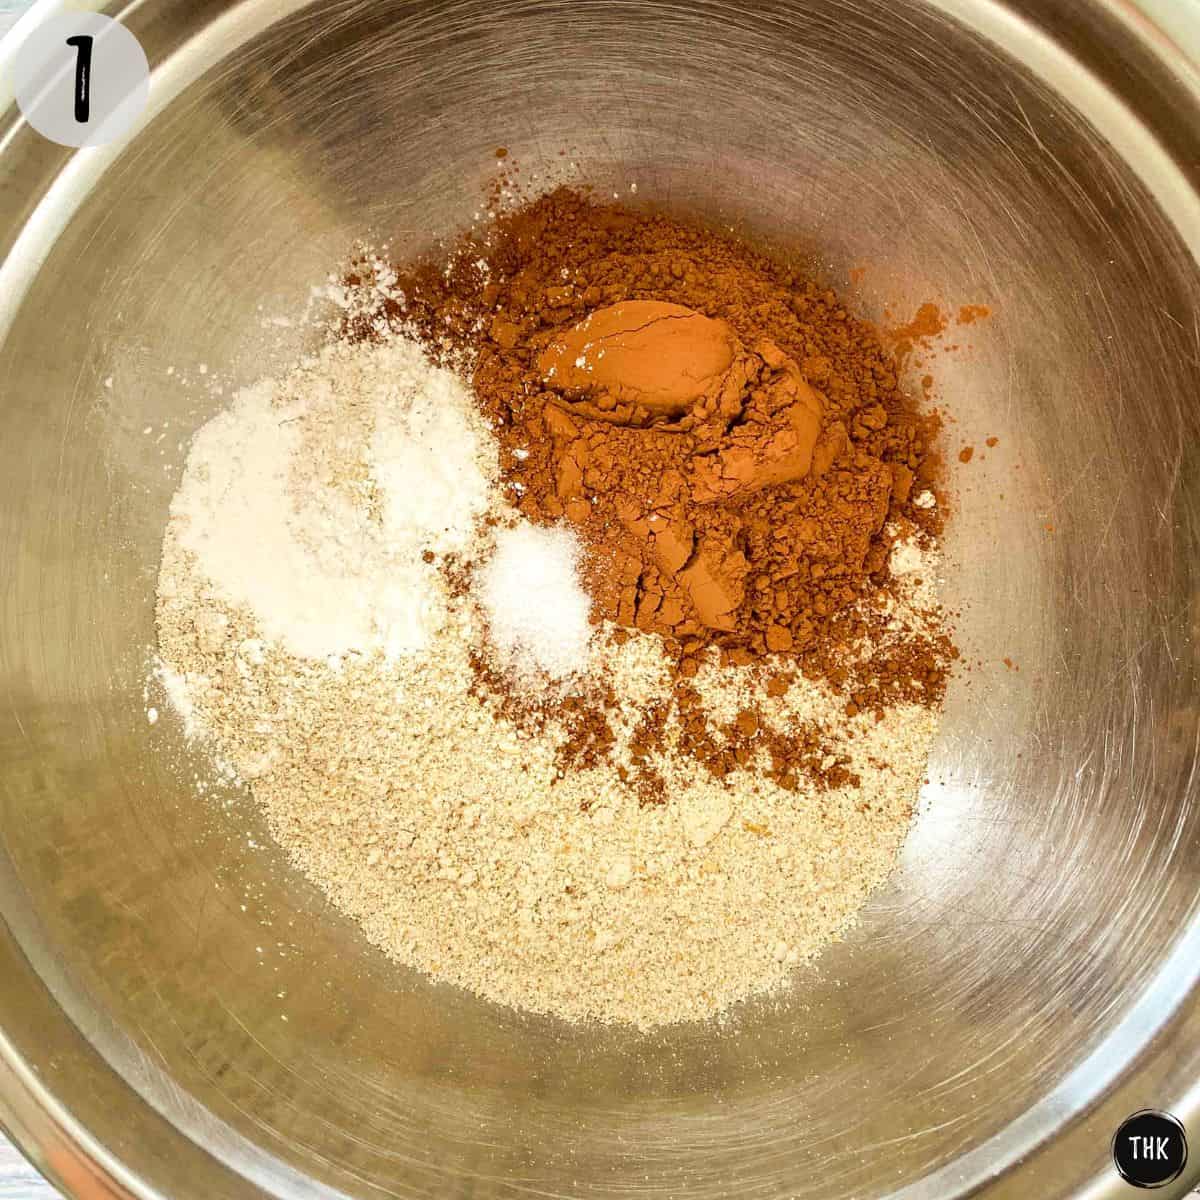 Flour and cocoa powder in mixing bowl.